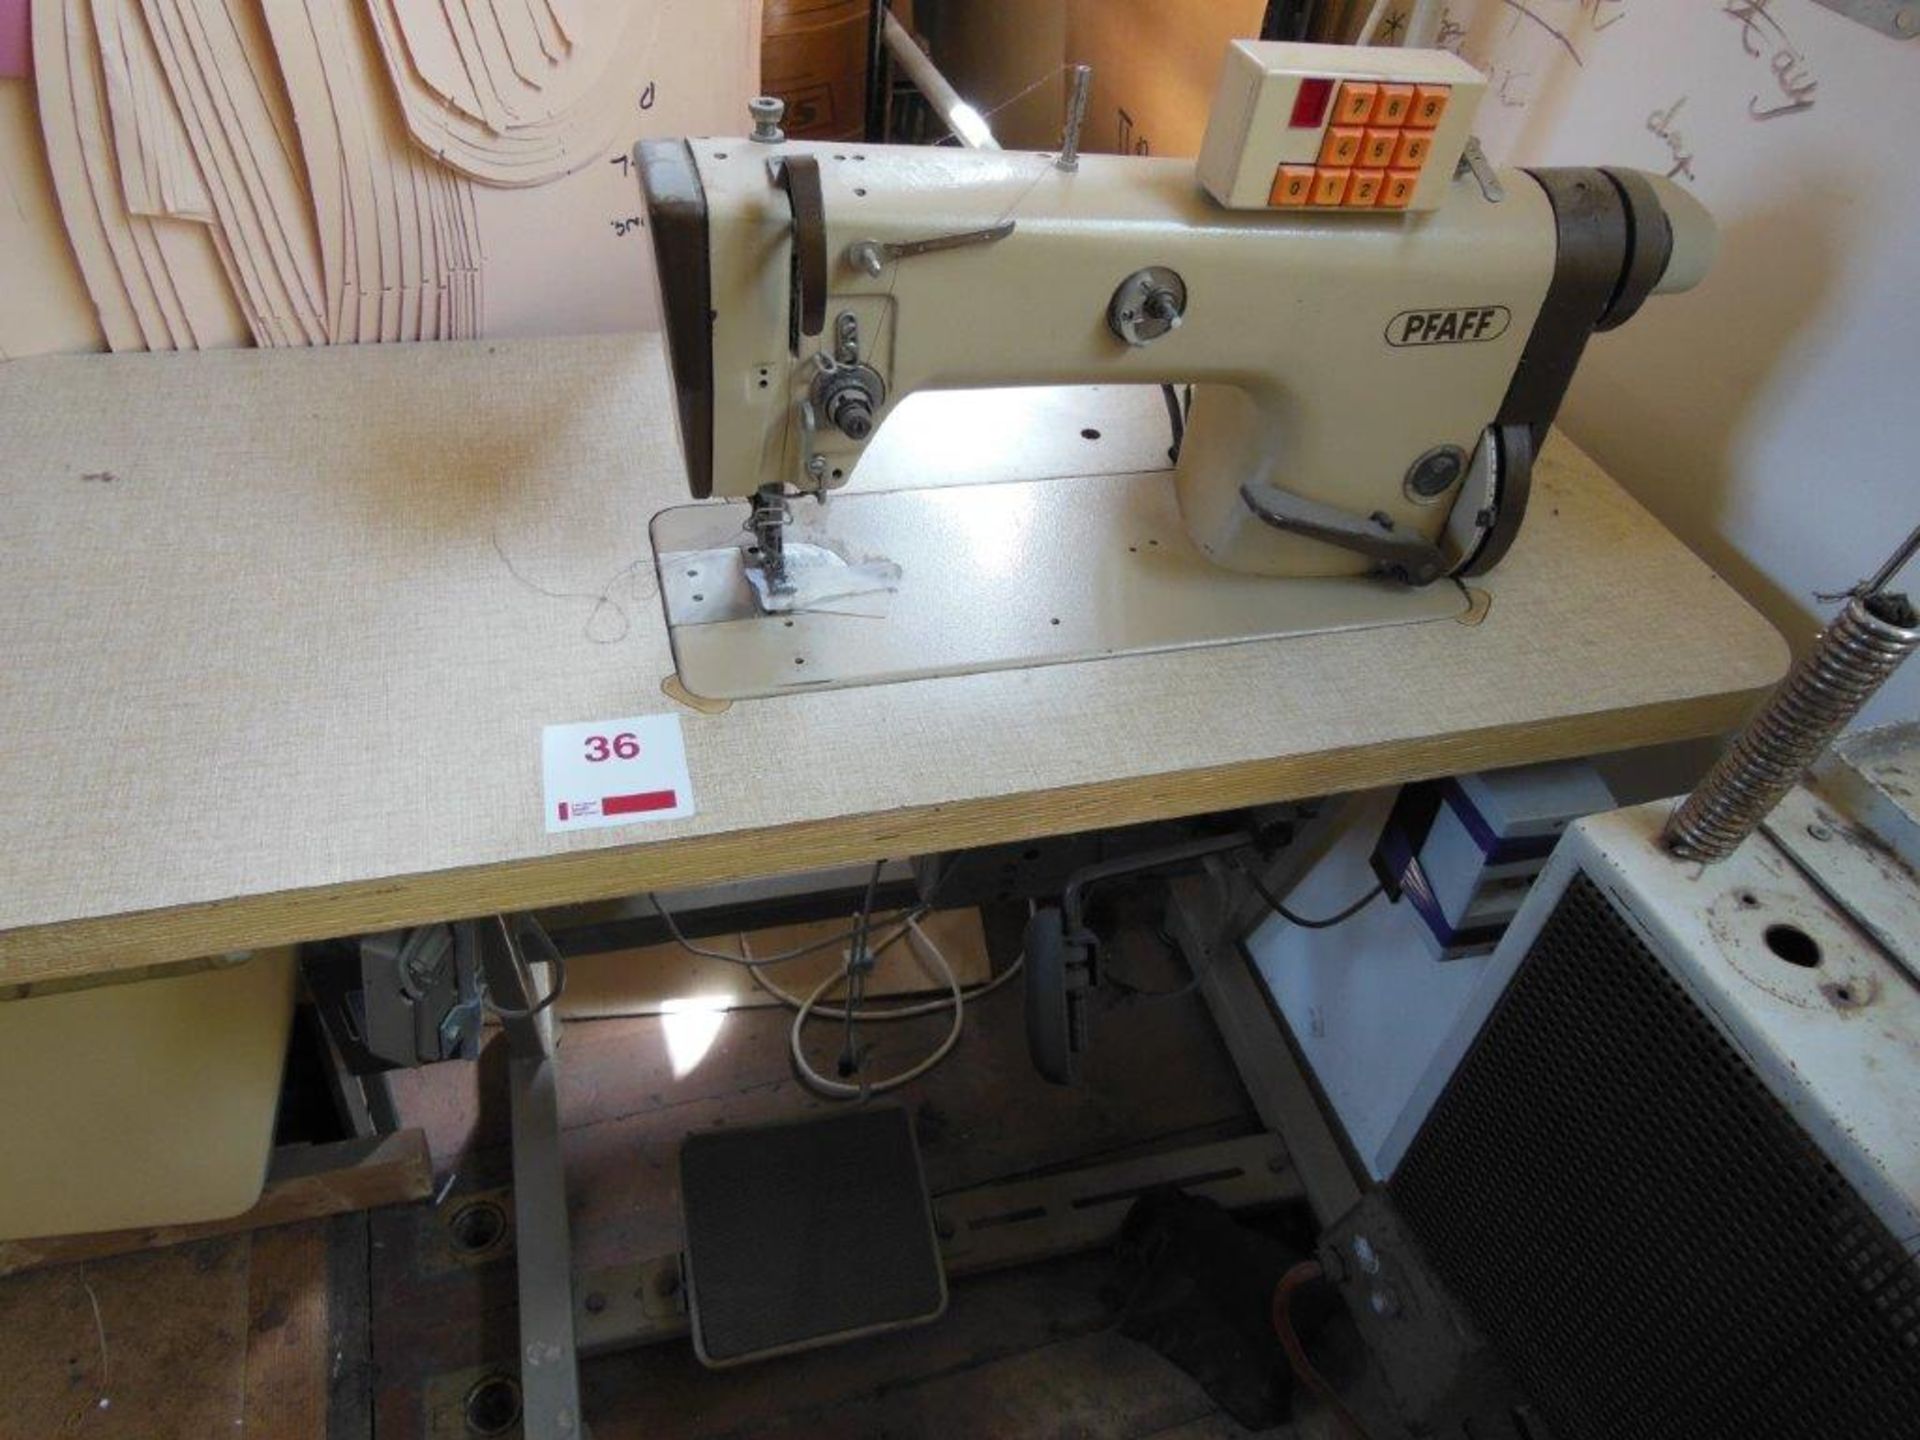 Pfaff 706/83-900-51 Industrial Sewing Machine, three phase. NB: this item has no CE marking. The